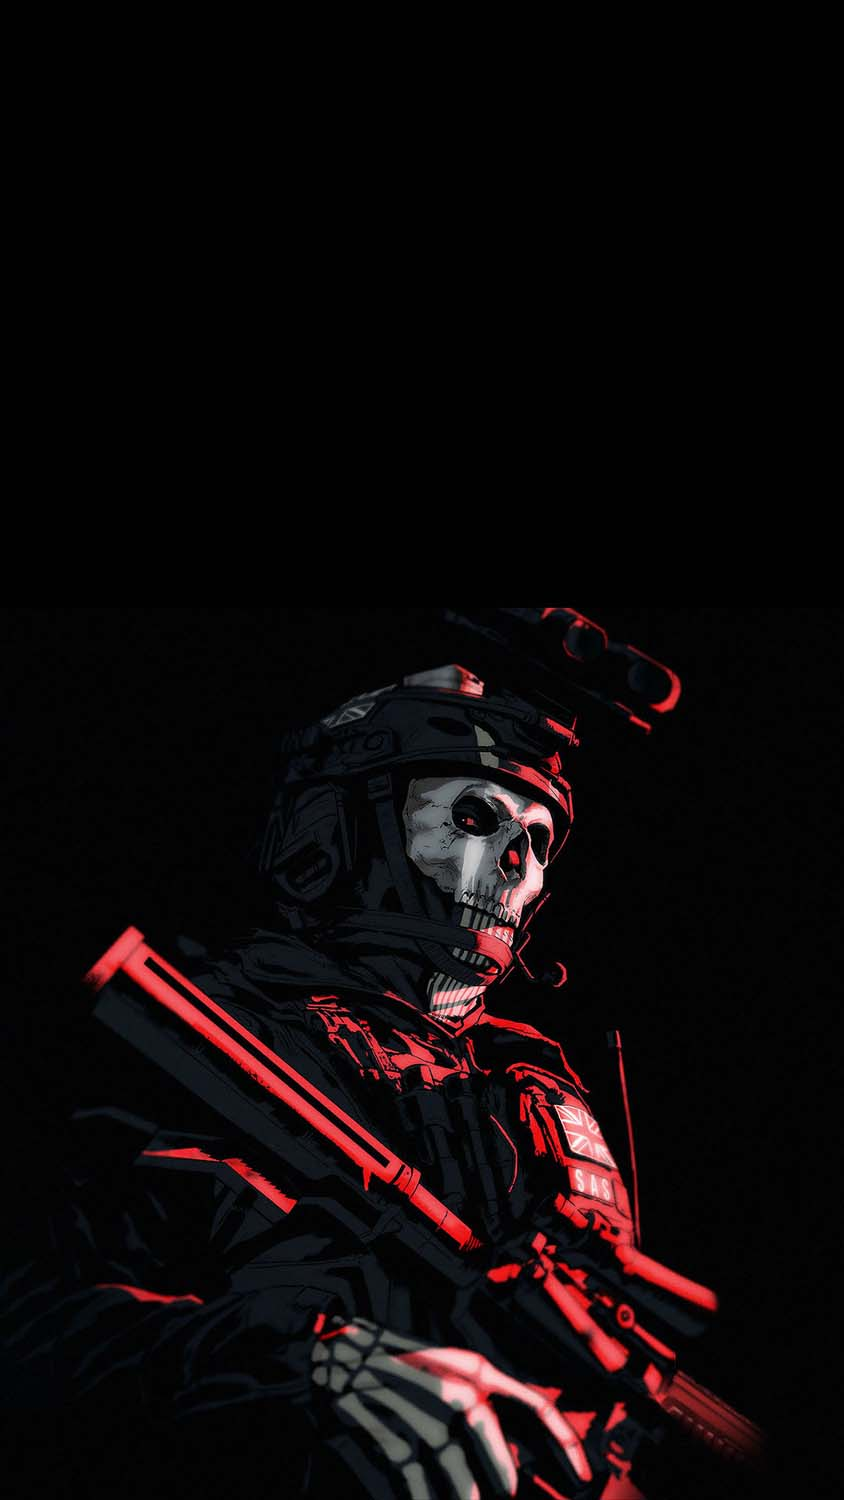 Ghost From Call Of Duty IPhone Wallpaper HD  IPhone Wallpapers